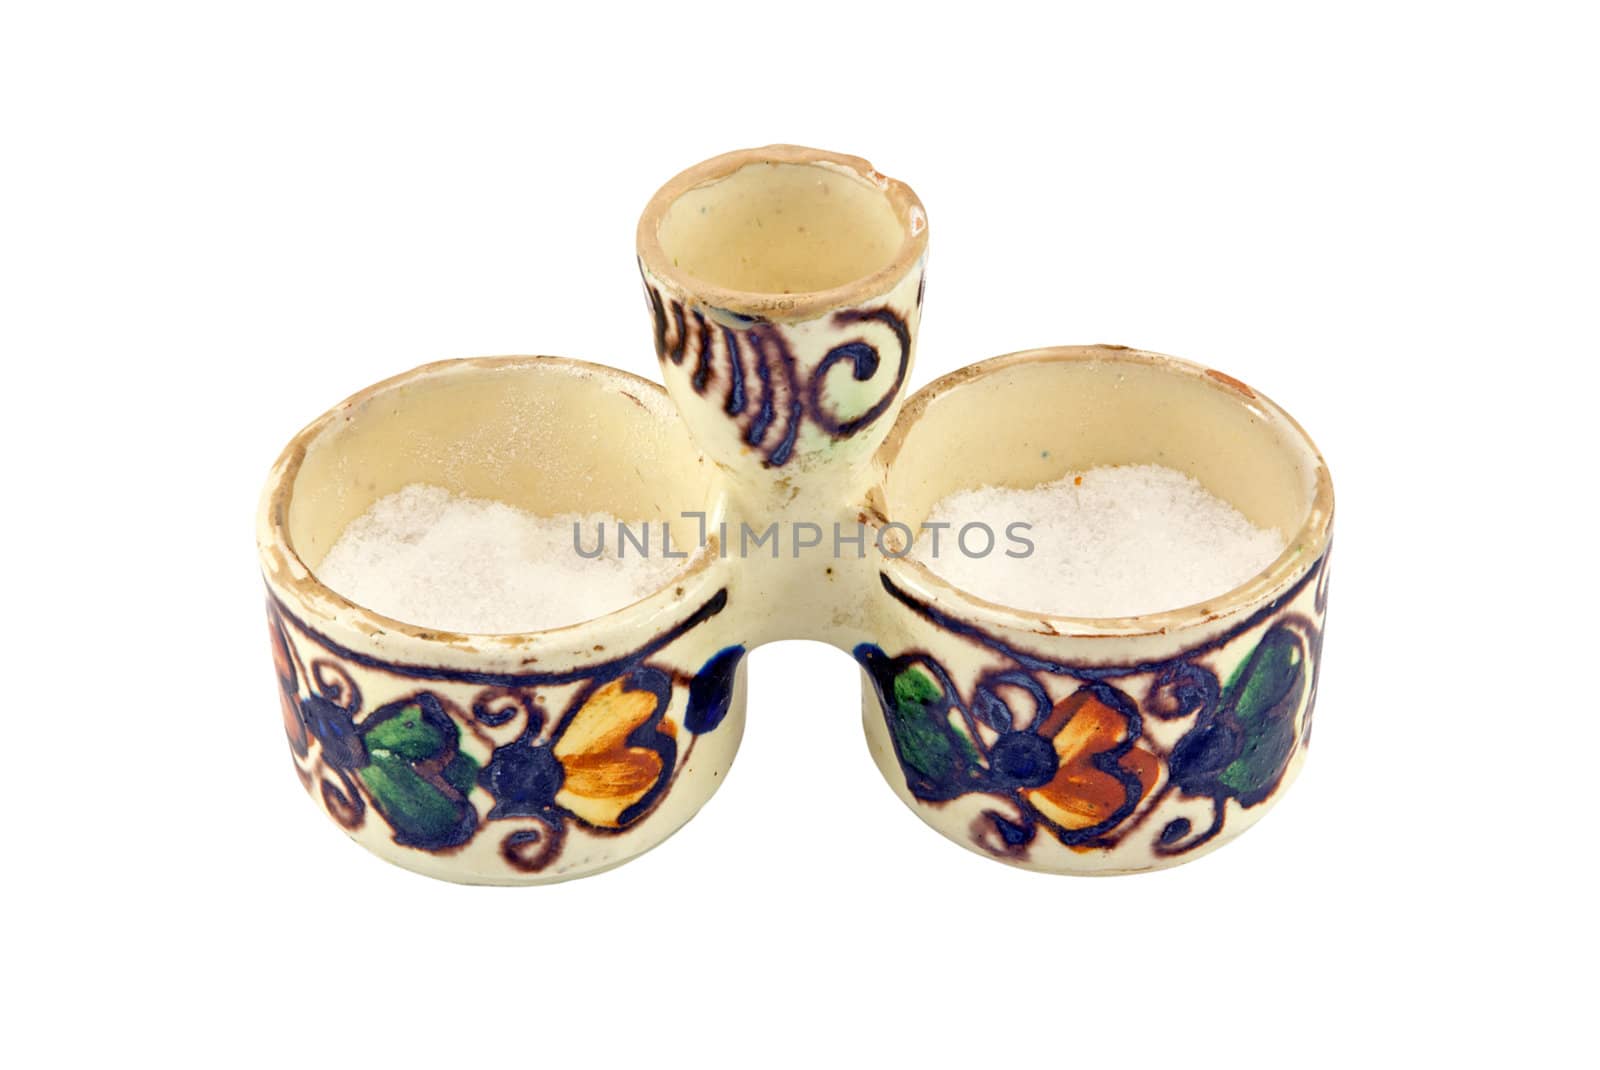 Salt cellar with traditional patterns isolated on white background